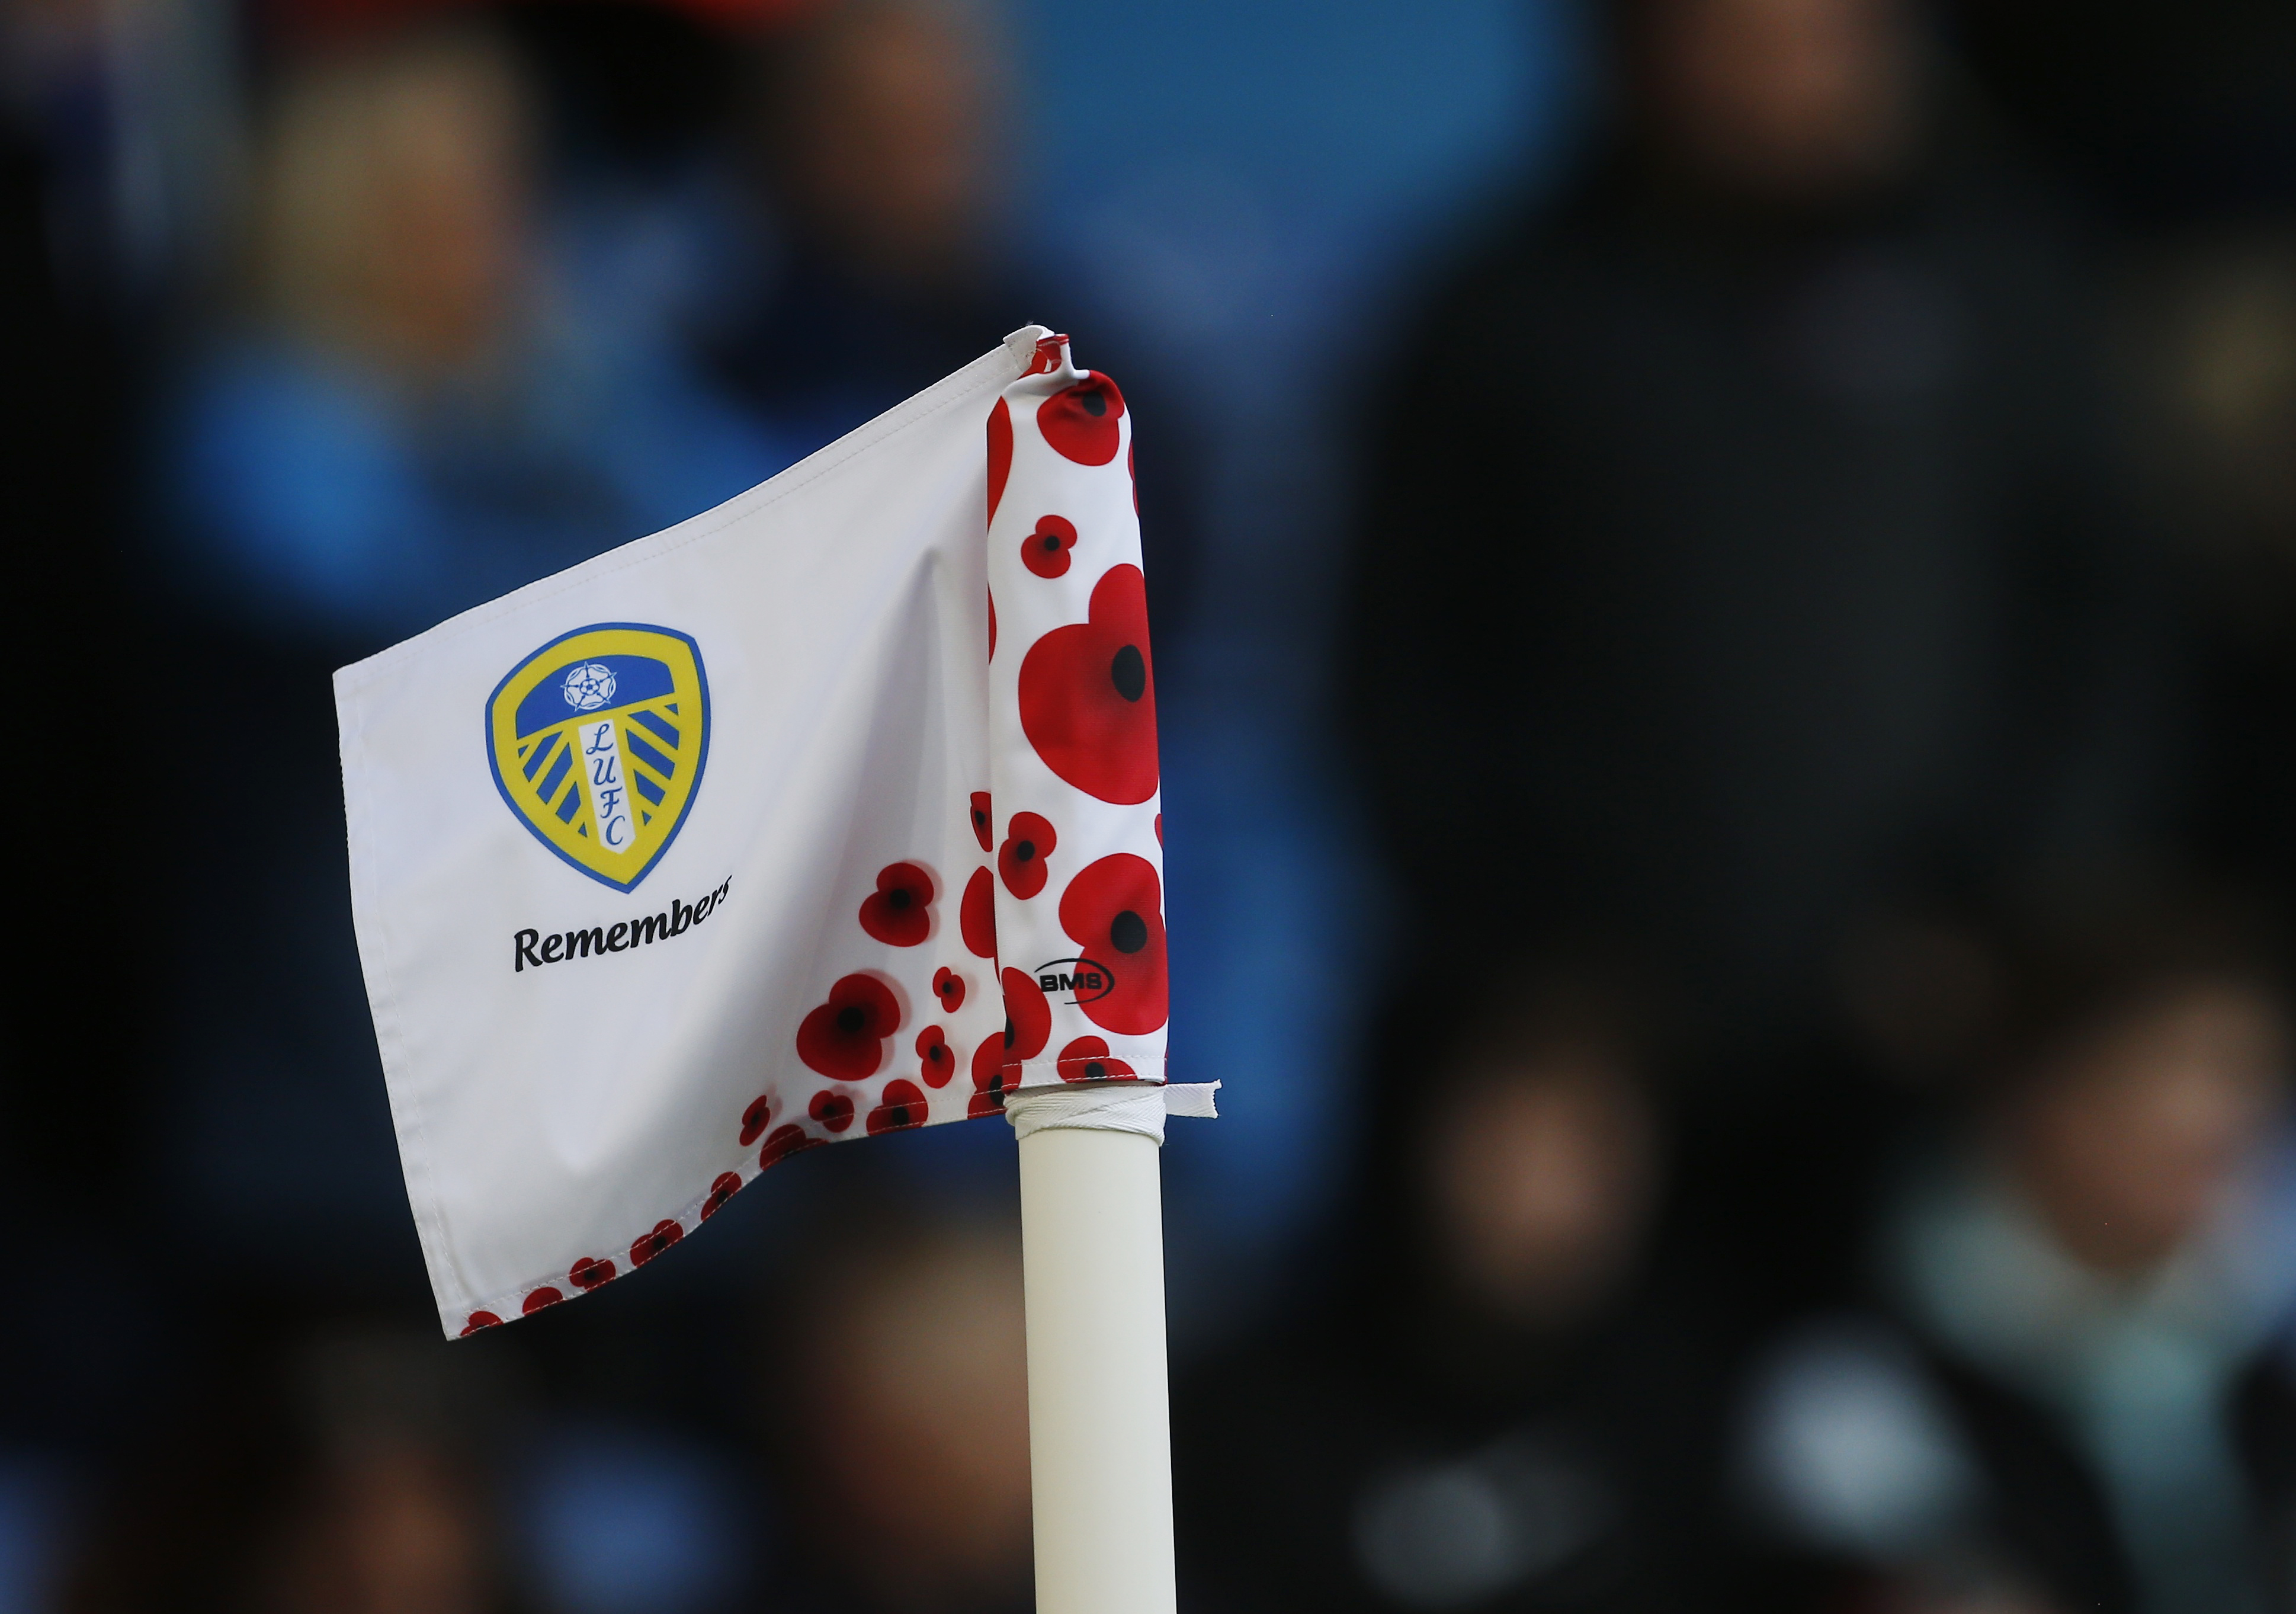 Soccer Football - Premier League - Leeds United v Leicester City - Elland Road, Leeds, Britain - November 7, 2021 Leeds United corner flag is seen with poppies as part of remembrance commemorations before the match. REUTERS/Craig Brough